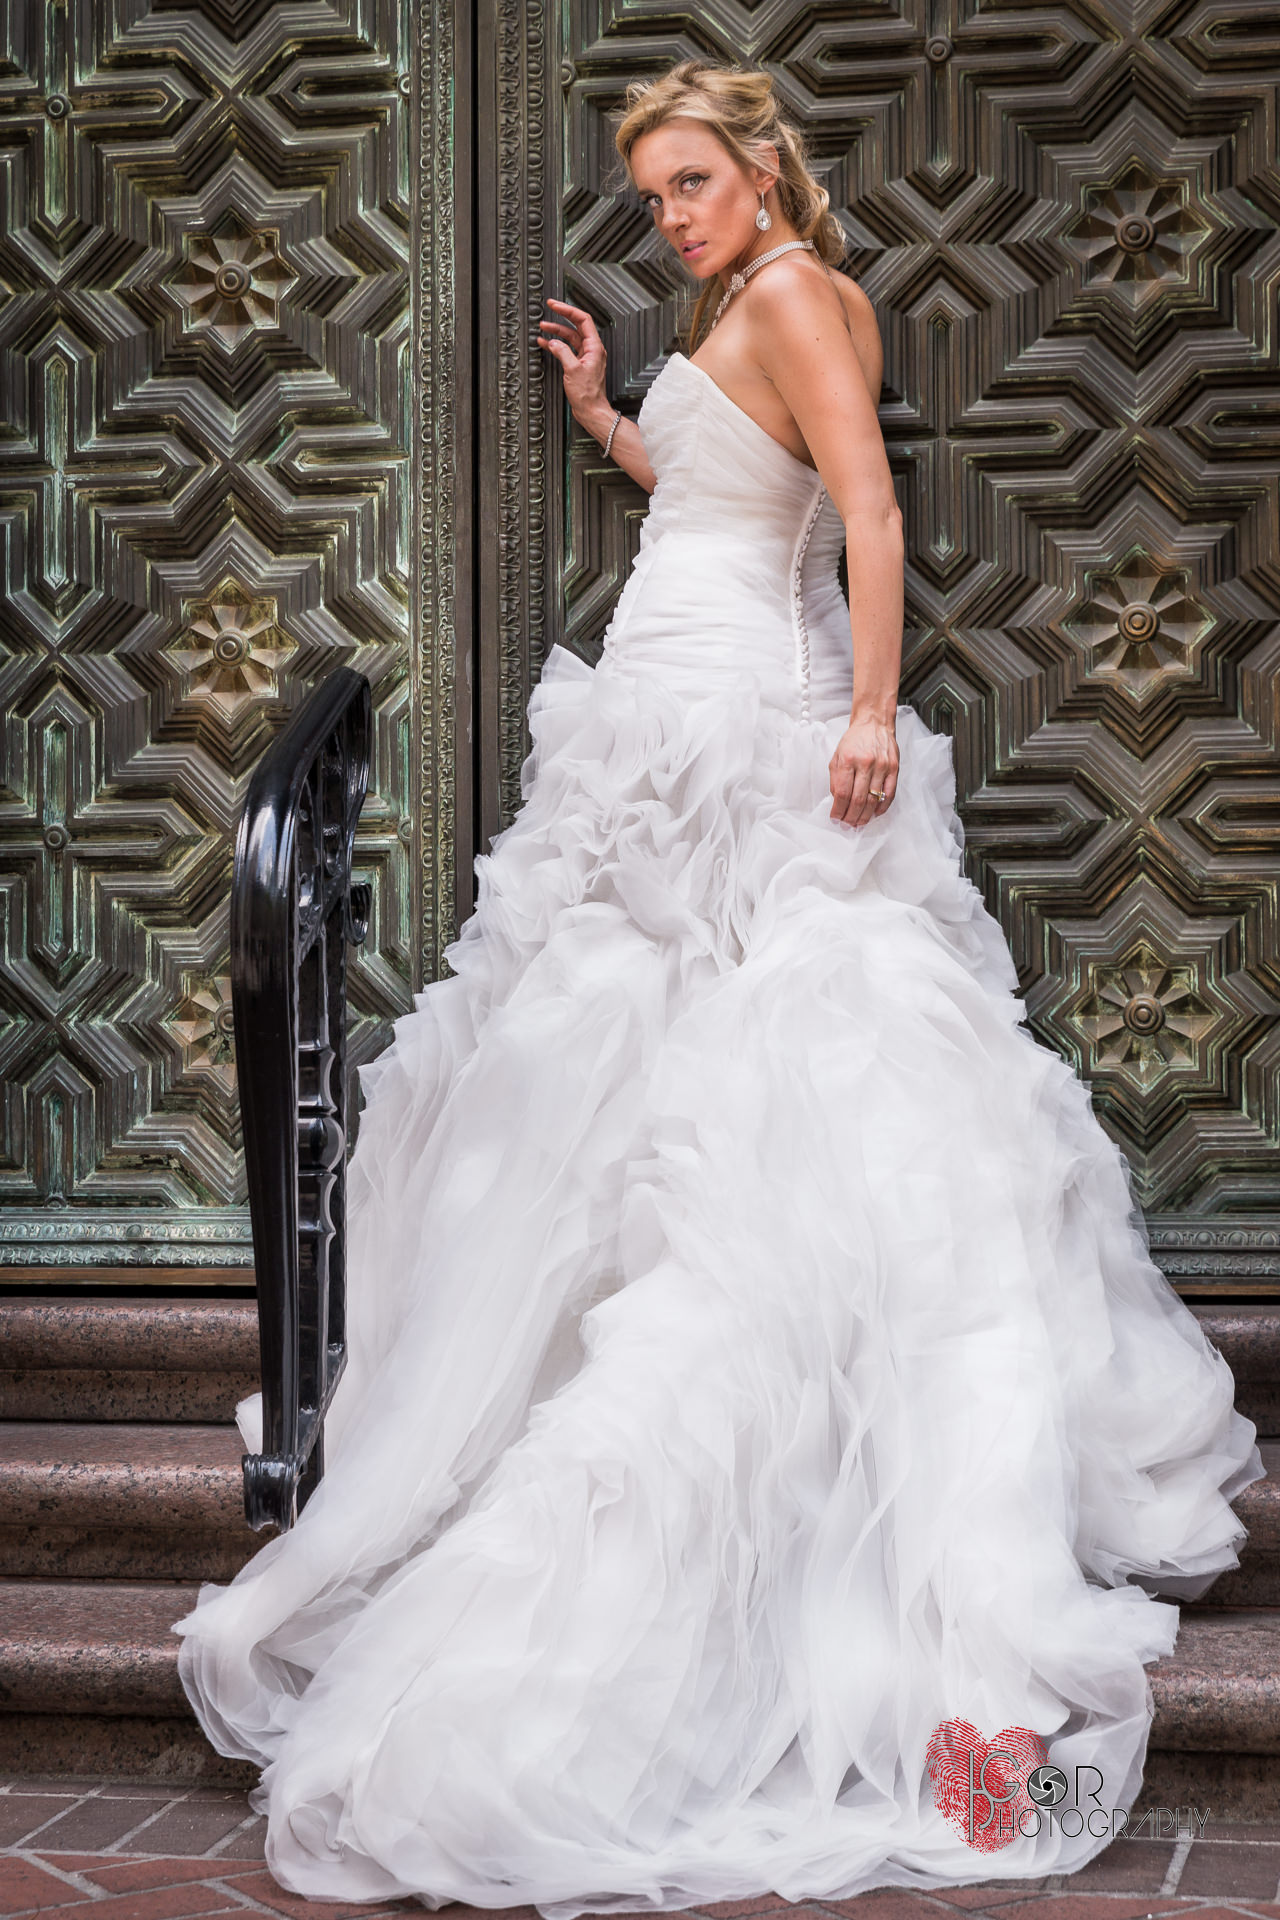 New Orleans bridal photography